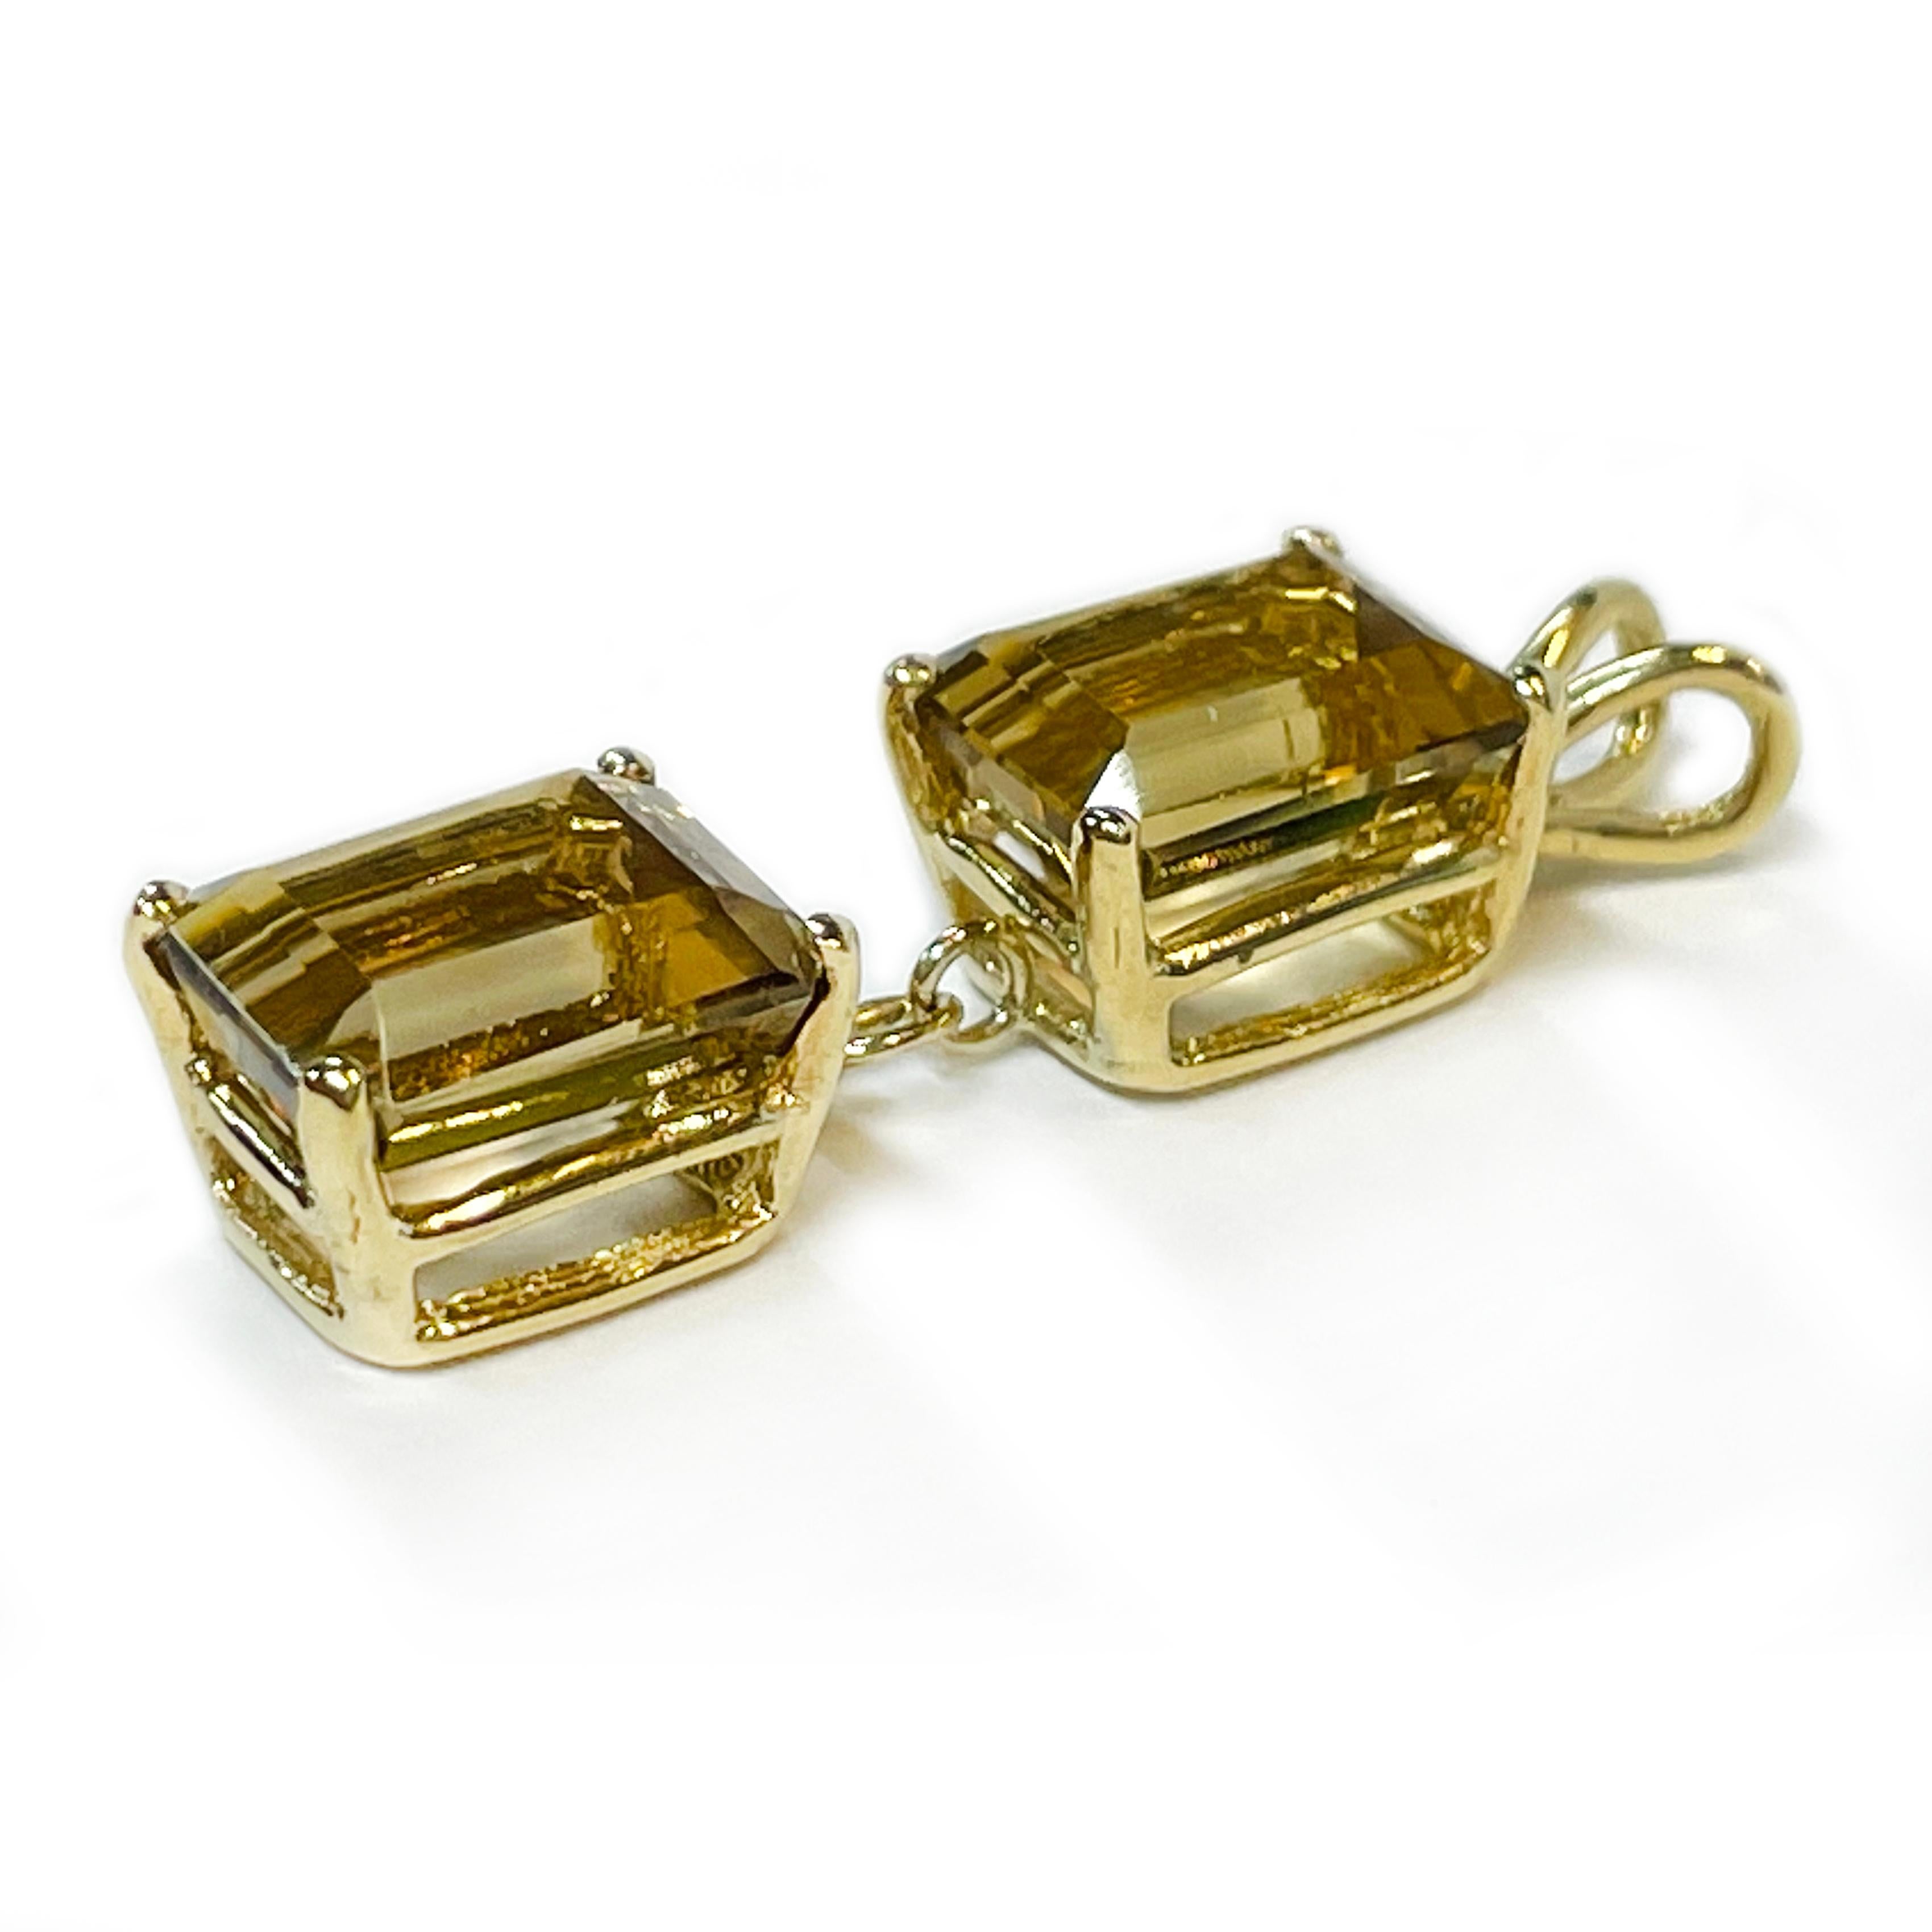 14 Karat Yellow Gold Citrine Dangle Pendant. The pendant features two 9.5 x 7.5mm Citrine emerald-cut gemstones. The light gold/brown color gemstones are four-prong set in double yellow gold base setting with a rabbit bail. The total carat weight of